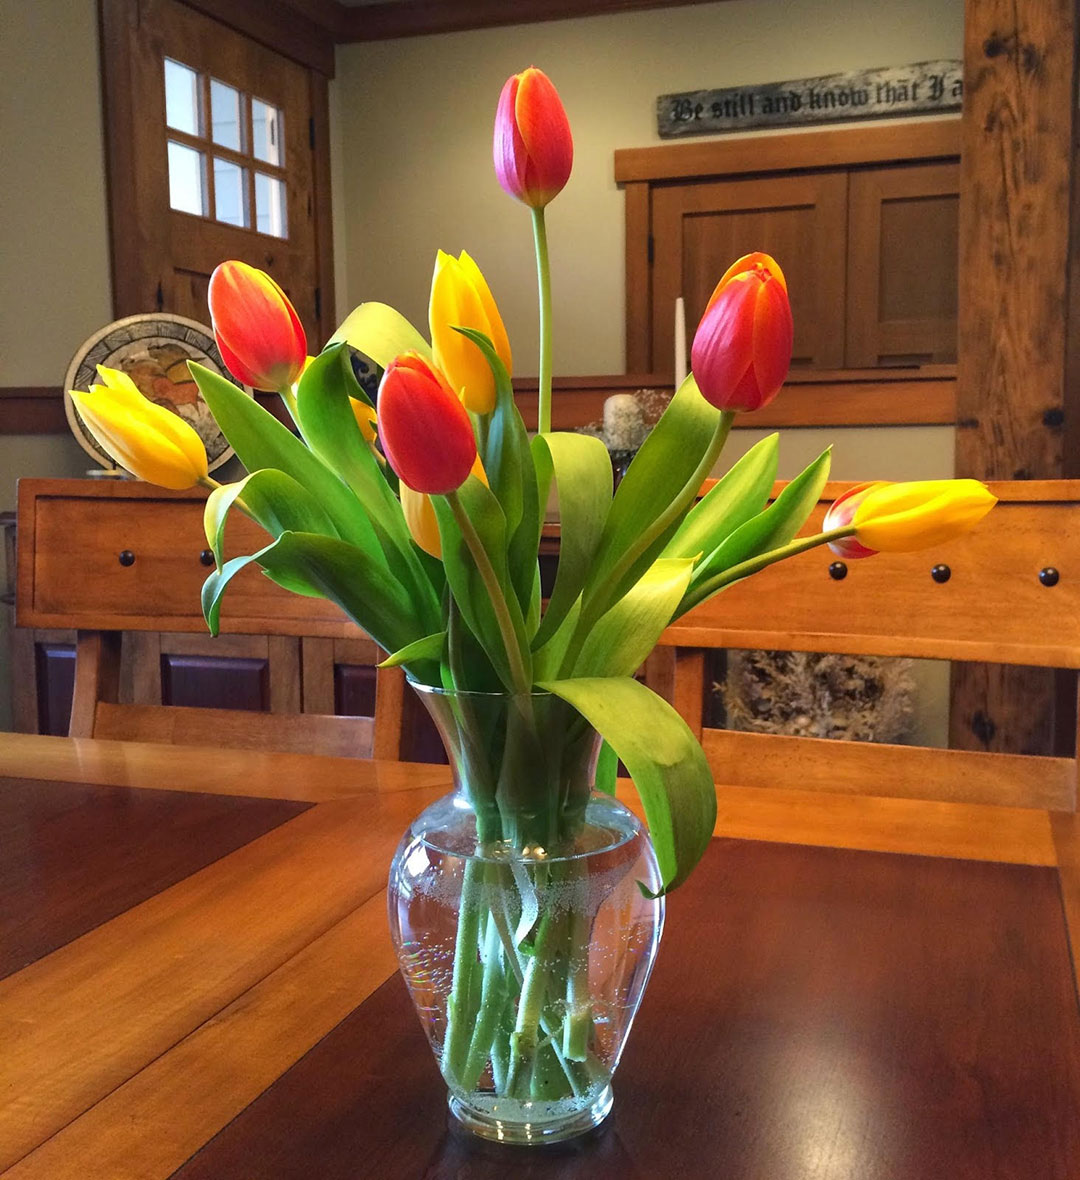 Tulips on the dining room table in a glass vase